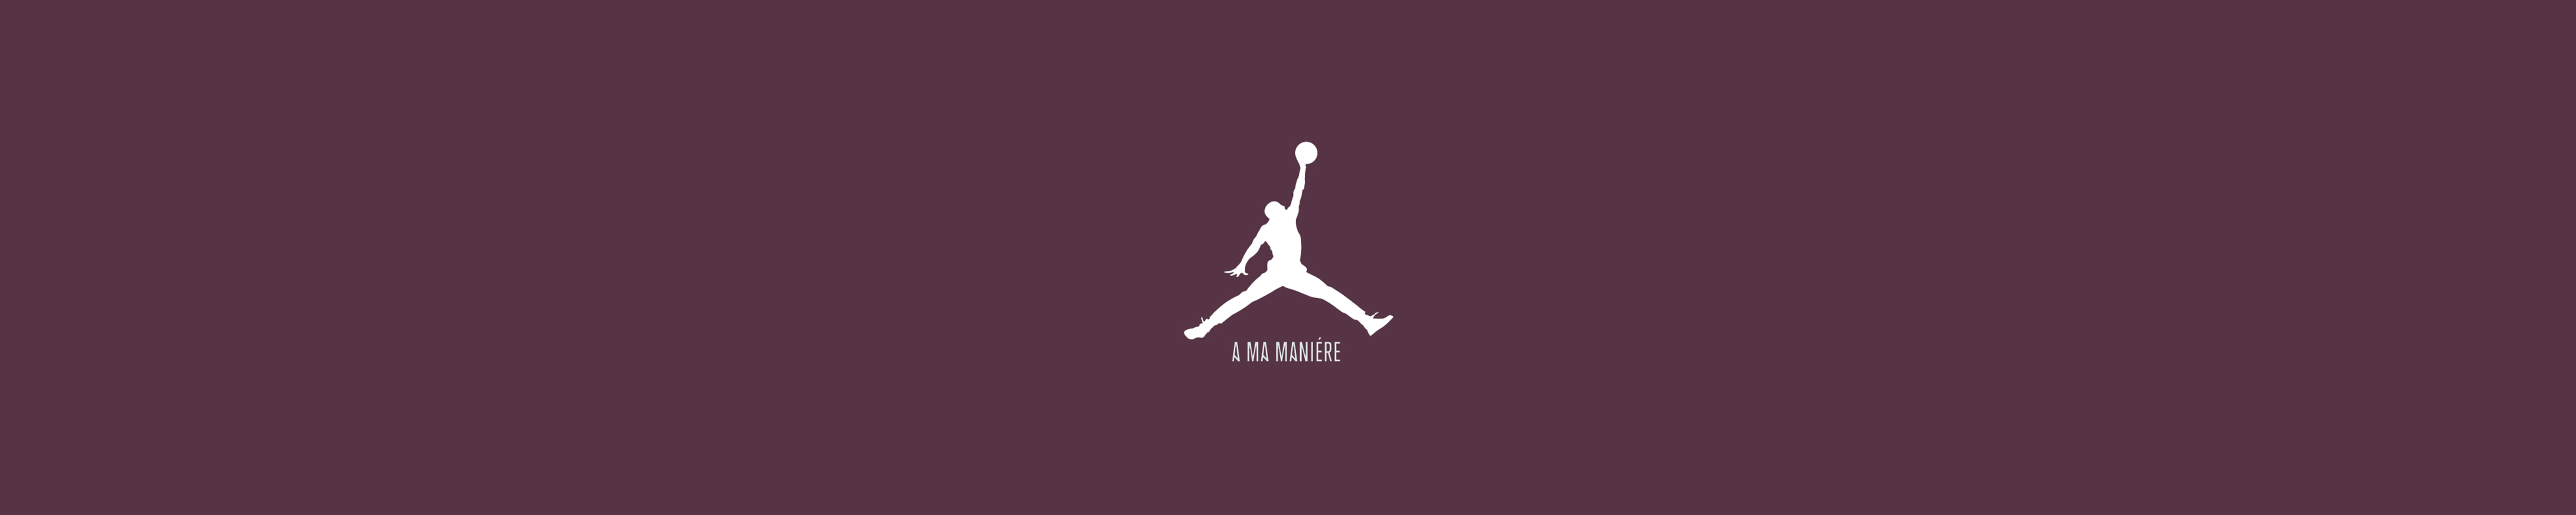 Two New A Ma Maniére x Nike/Air Jordan Collaborations Are Inbound